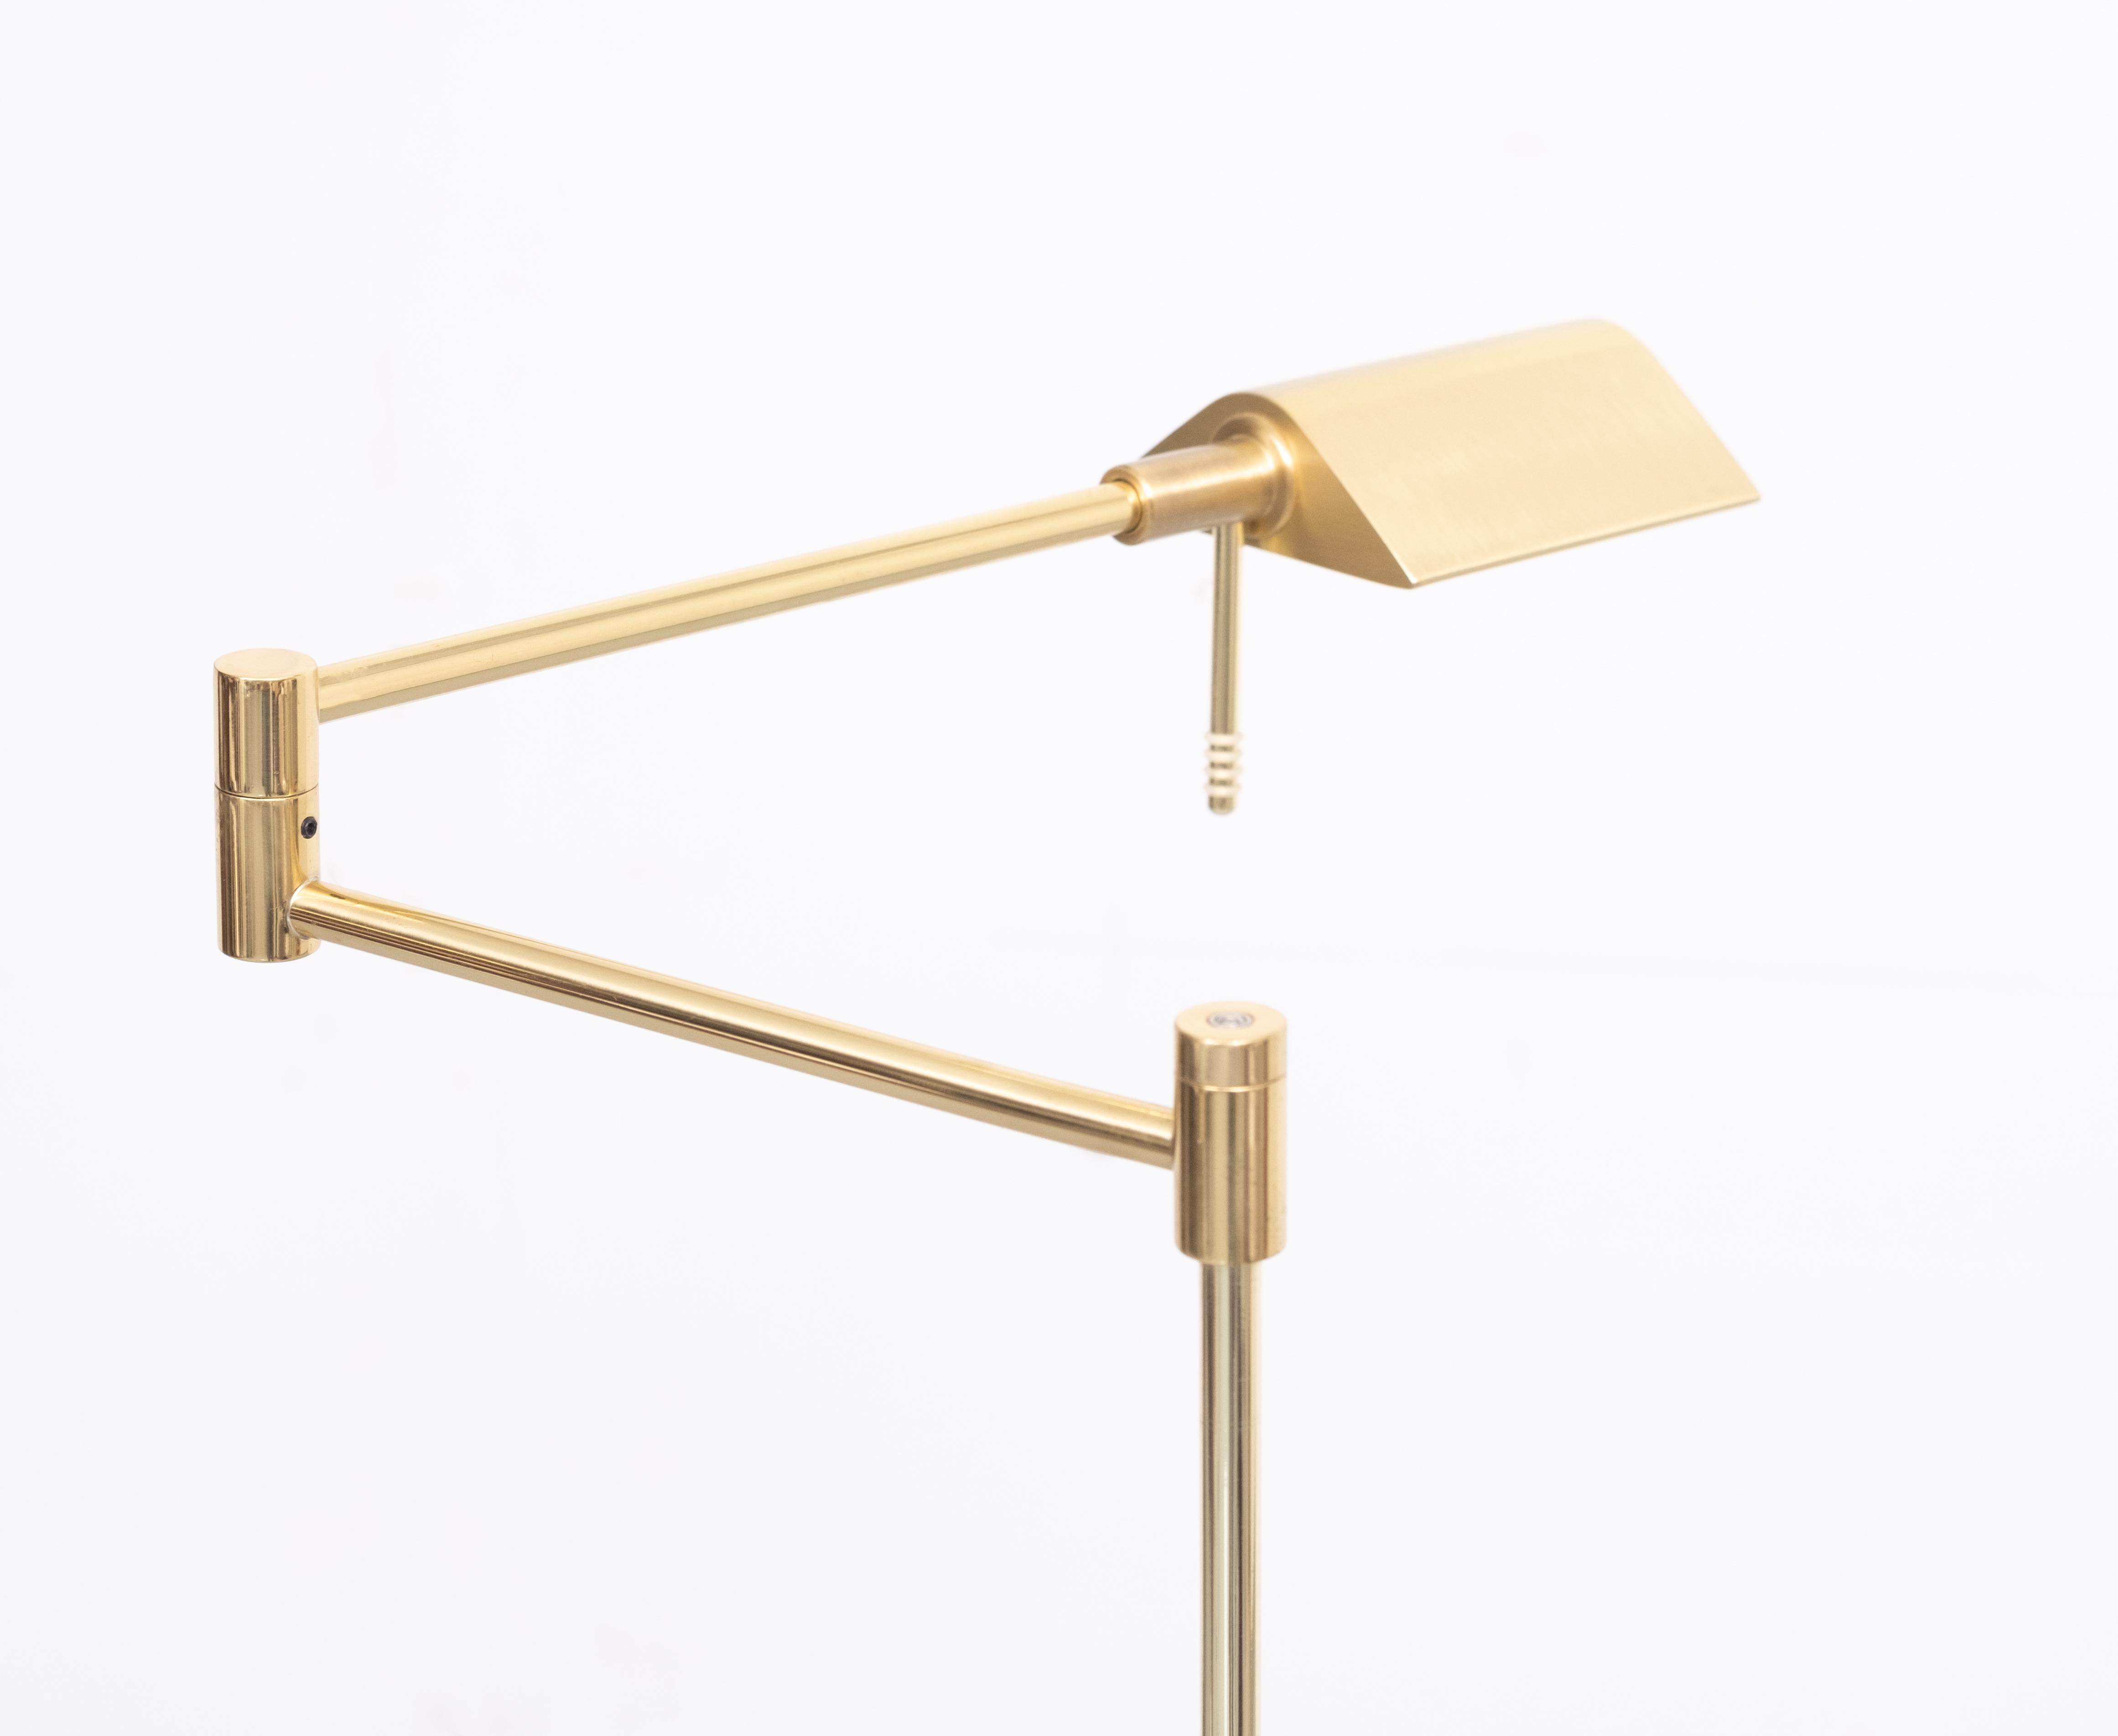 Superb halogen swing arm floor lamp, ideal reading light. Adjustable in height and direction. Brush t Brass color. Featured a touch dimmer just put your finger on the button an the light go brighter ore softer. 
see photos. Very good quality lamp.